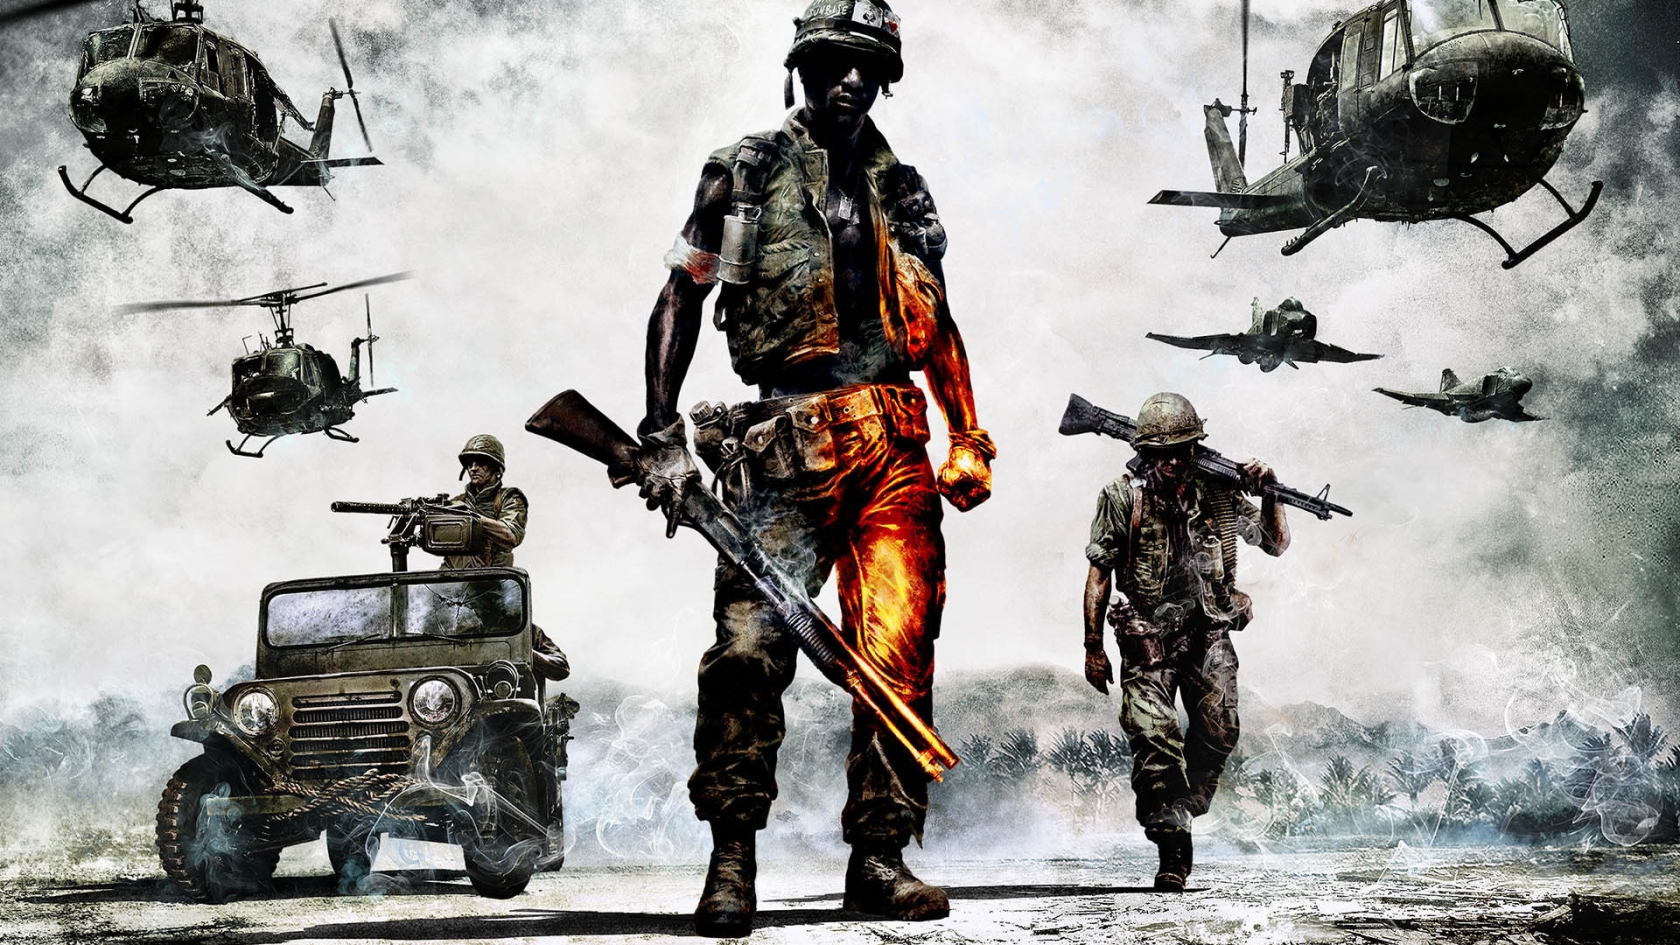 Battlefield Bad Company 2 Game for 1680 x 945 HDTV resolution